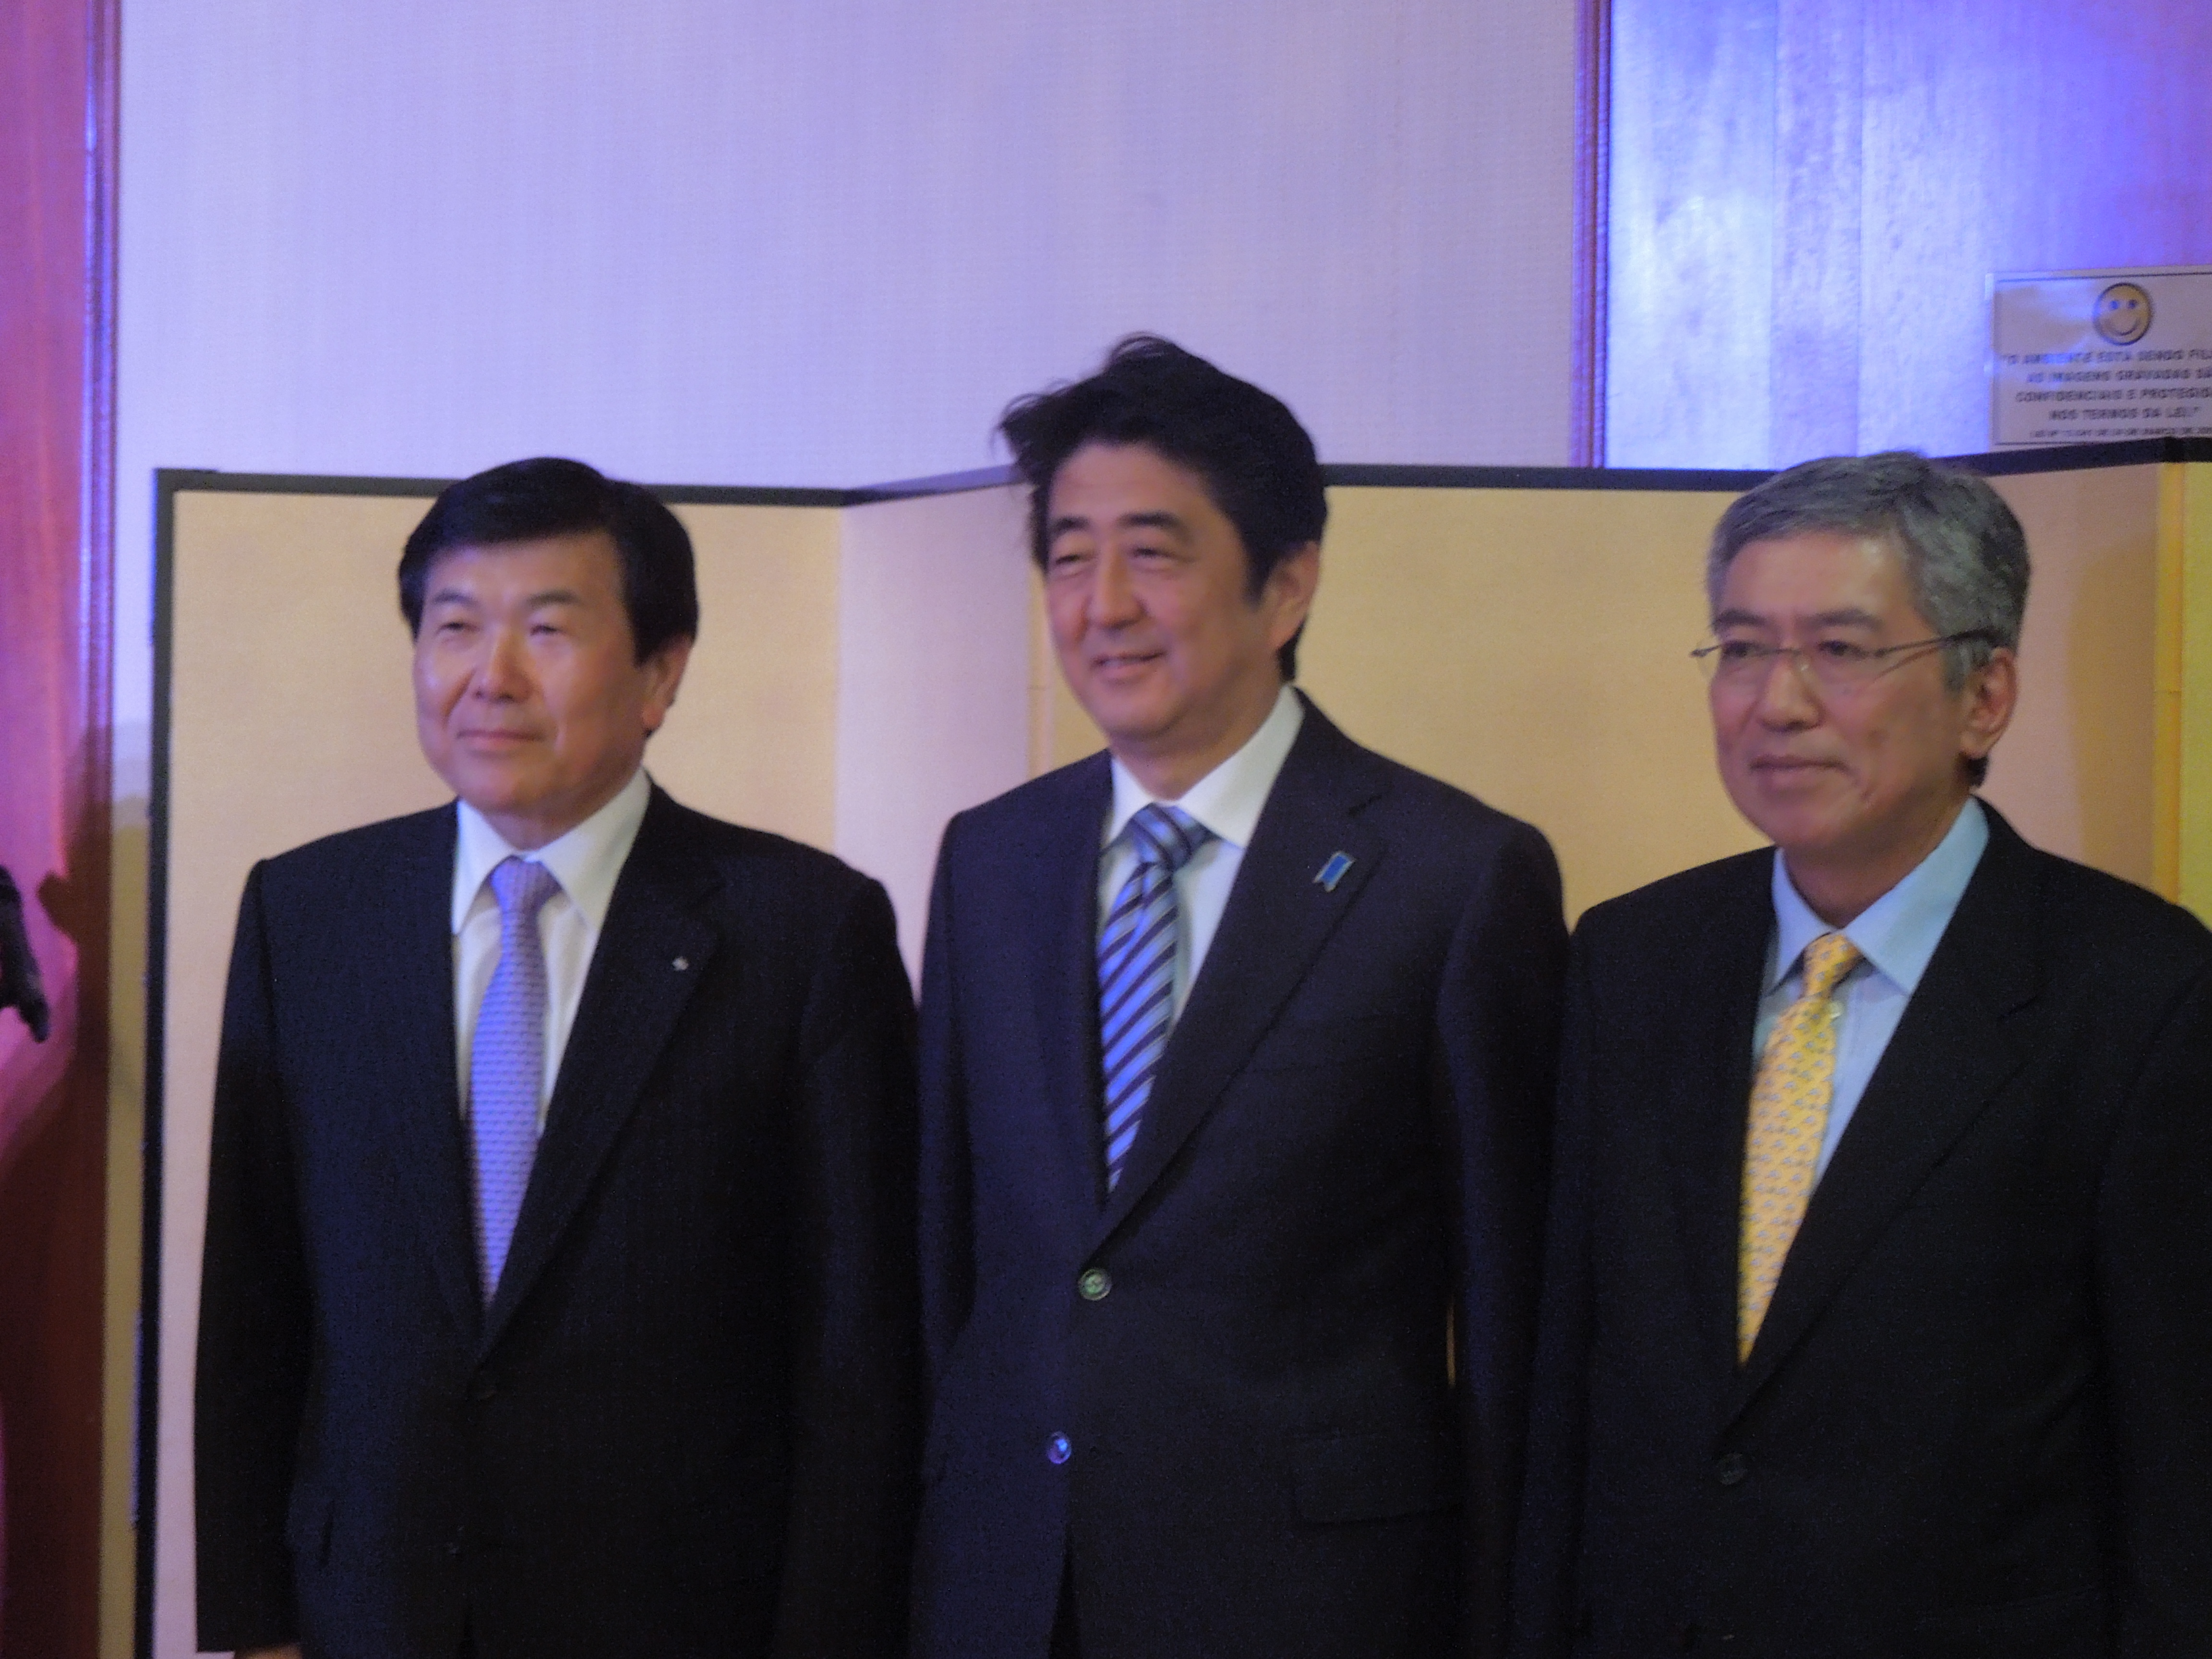 (From left to rigiht: President Global of Mitsui Iijima, 
Prime Minister of Japan Abe, and President of Mitsui Brazil Fujii)